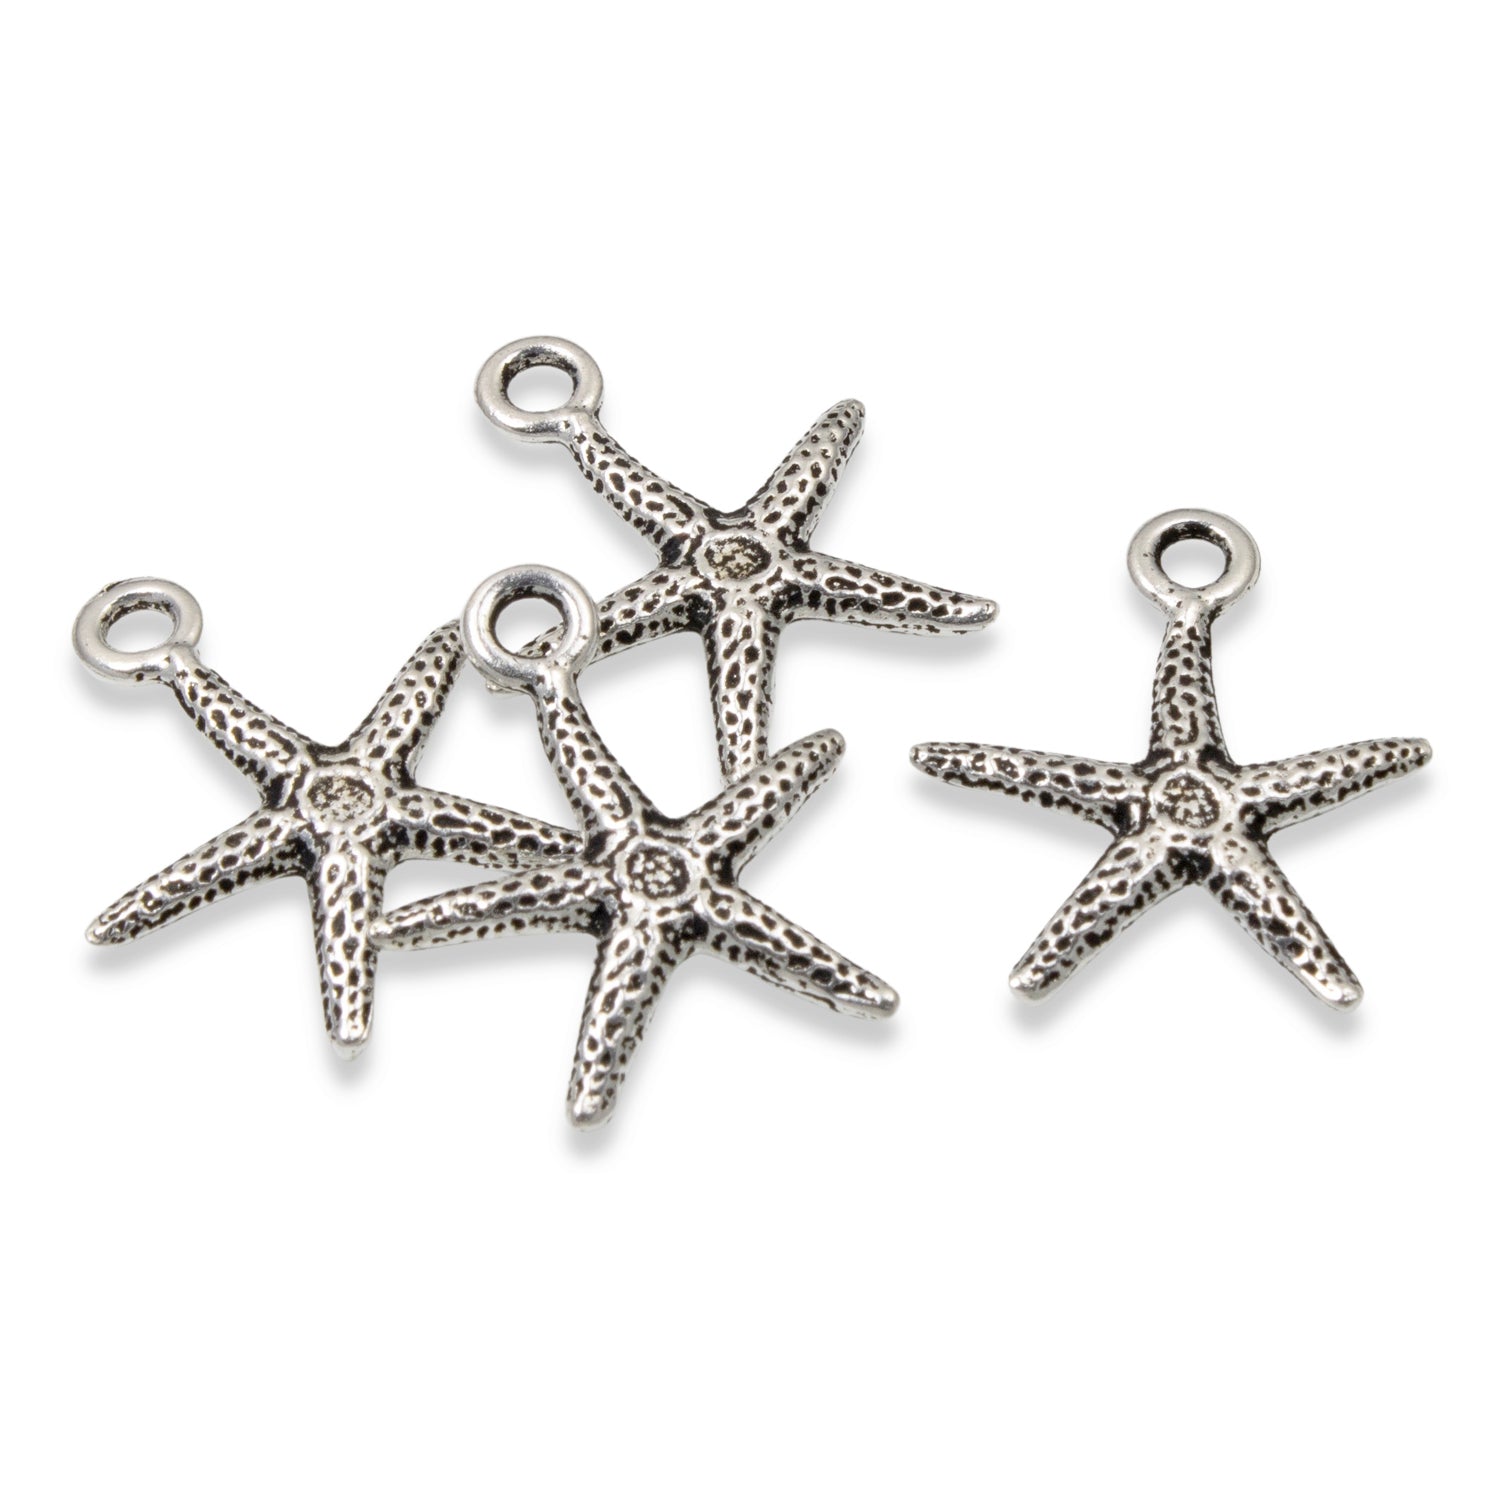 Wholesale Gold Star Charms for Jewelry Making - TierraCast